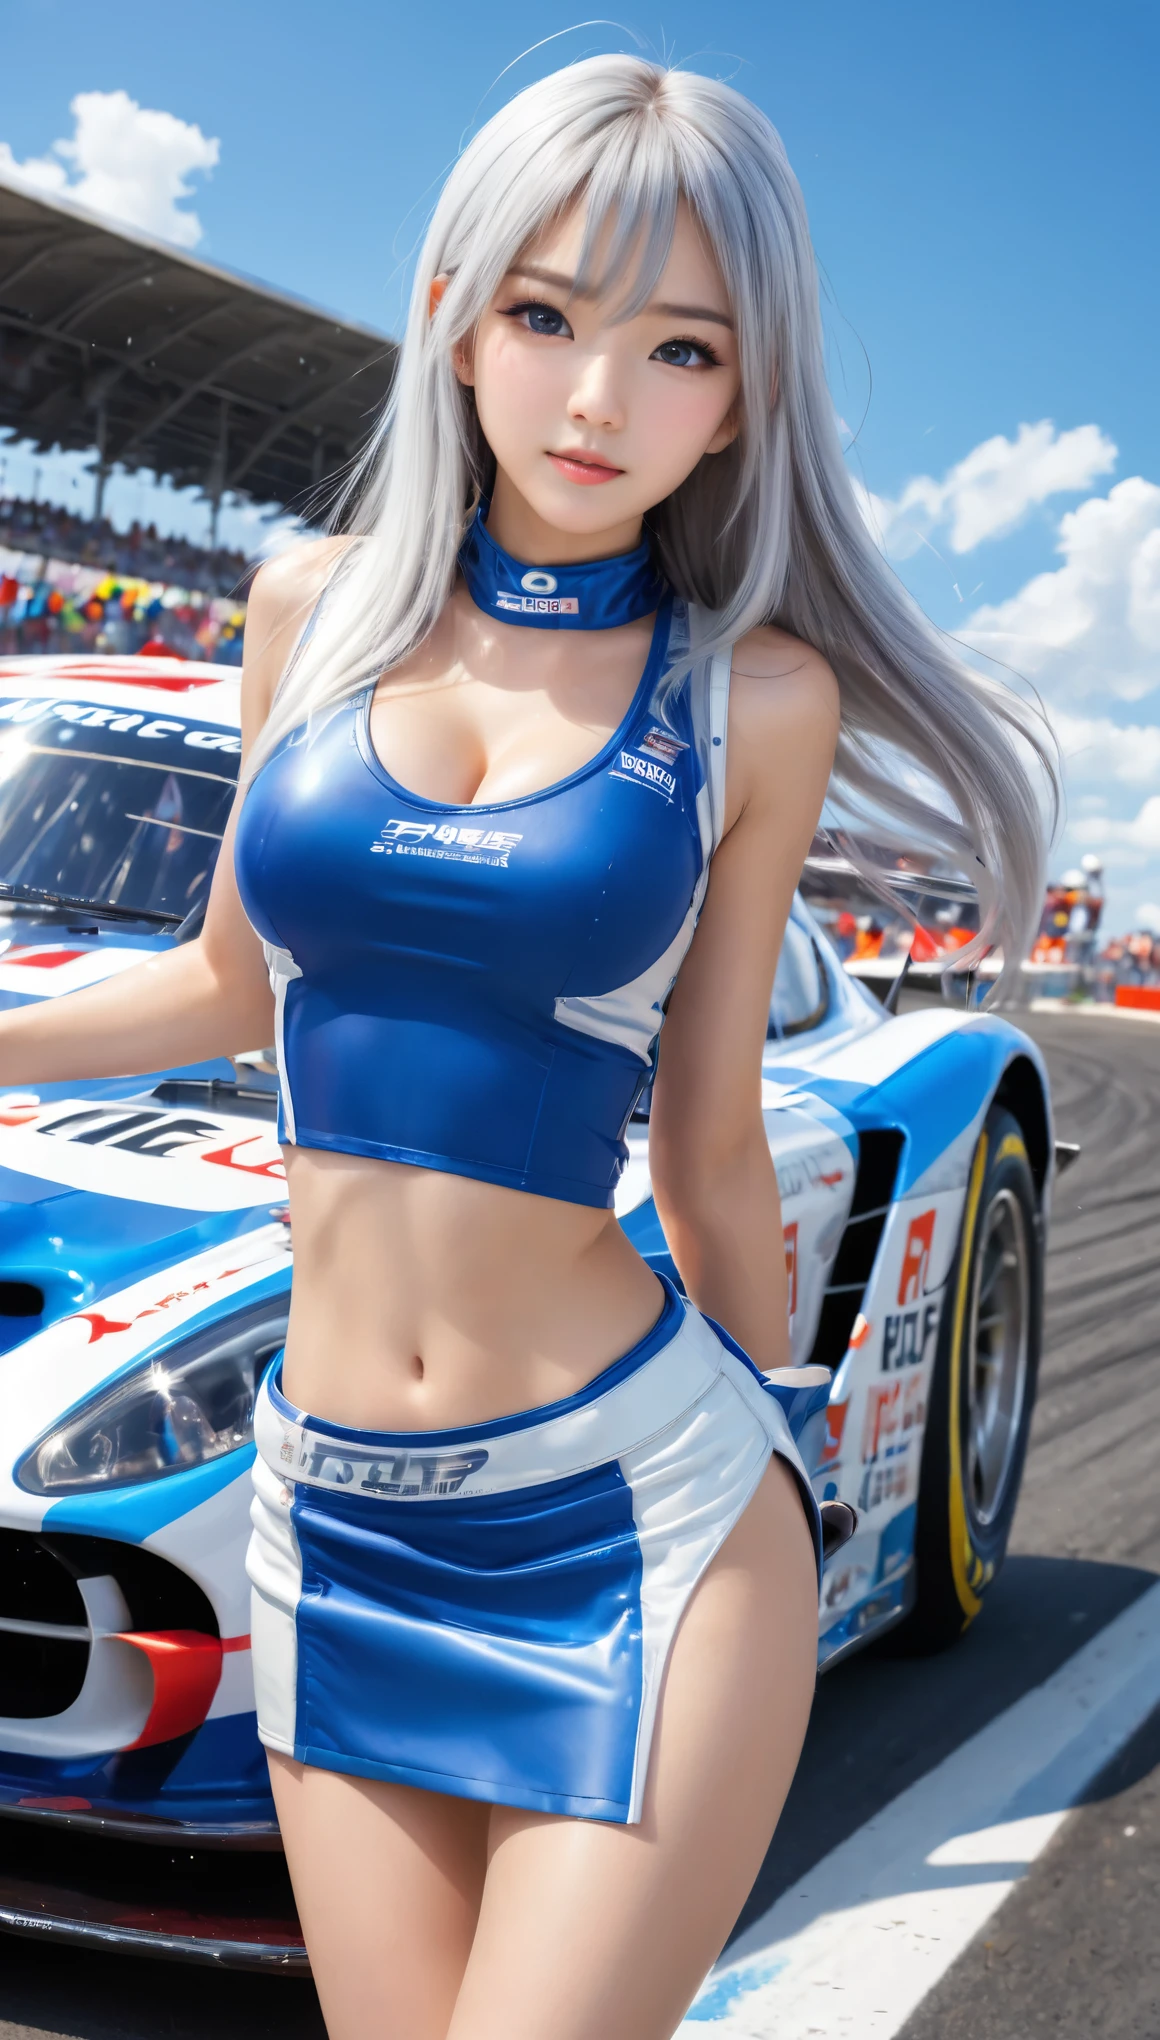 Highest quality, Super quality, 16K, Incredibly absurd, Very detailed, 2.5D, delicate and dynamic, blue sky, Confetti, Racing Car, flag, Small face, Extremely delicate facial expression, Delicate eye depiction, Extremely detailed hair, Upper body close-up, erotic, sole sexy Japanese lady, healthy shaped body, 22 years old lady, Race Queen,  huge firm bouncing busts, white silver long hair, sexy long legs, Glowing Skin, , Flashy Race Queen costume, blue tight skirt, white leather long boots, Formula 1, Auto Racing Track